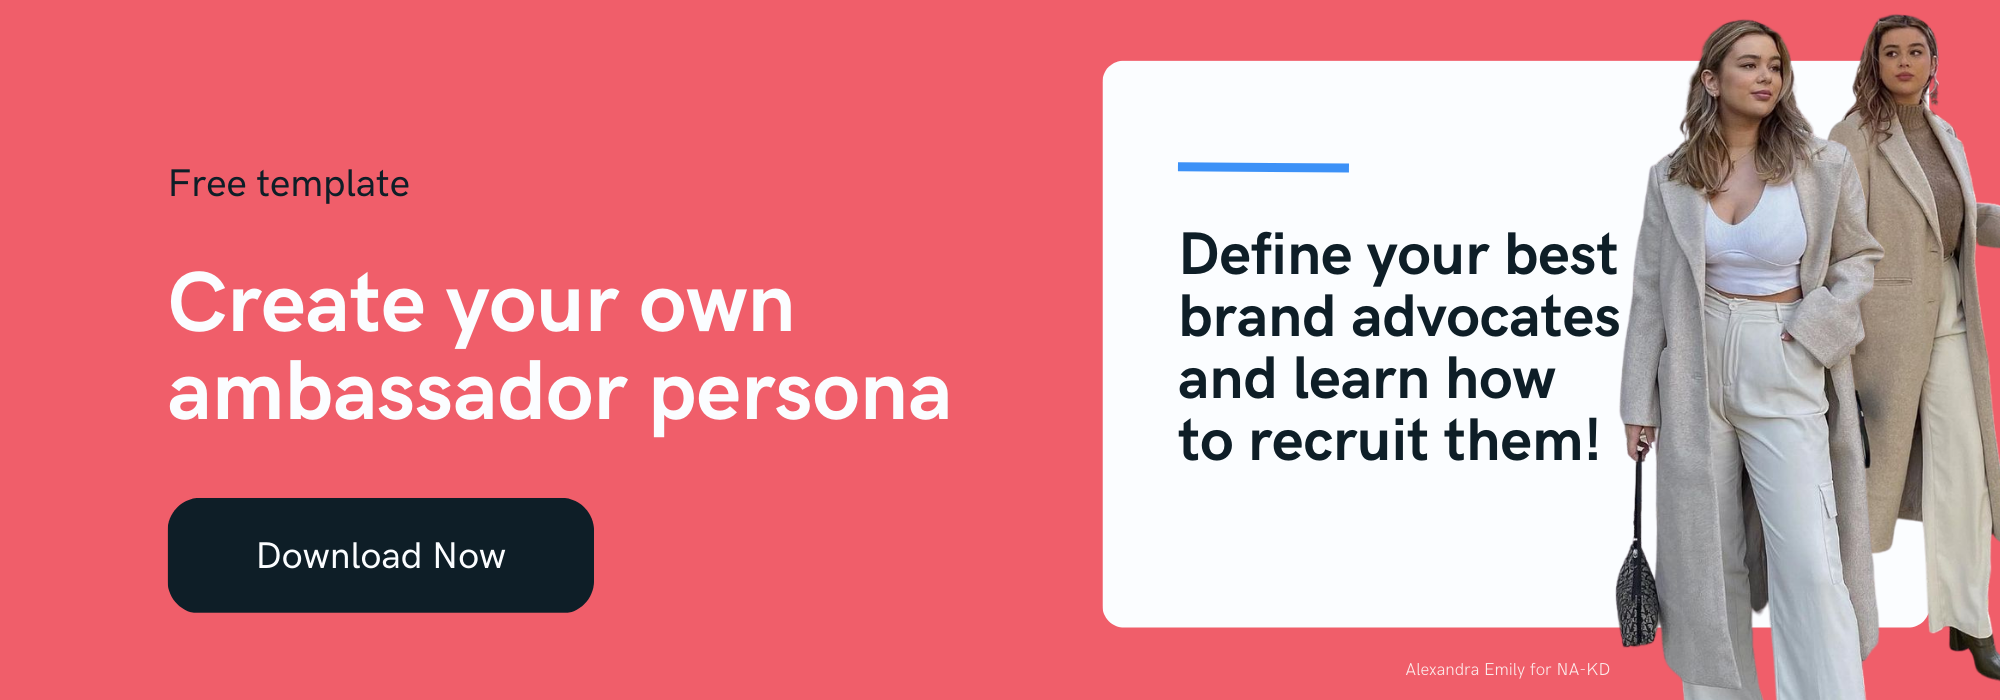 Create Your Own Ambassador Persona